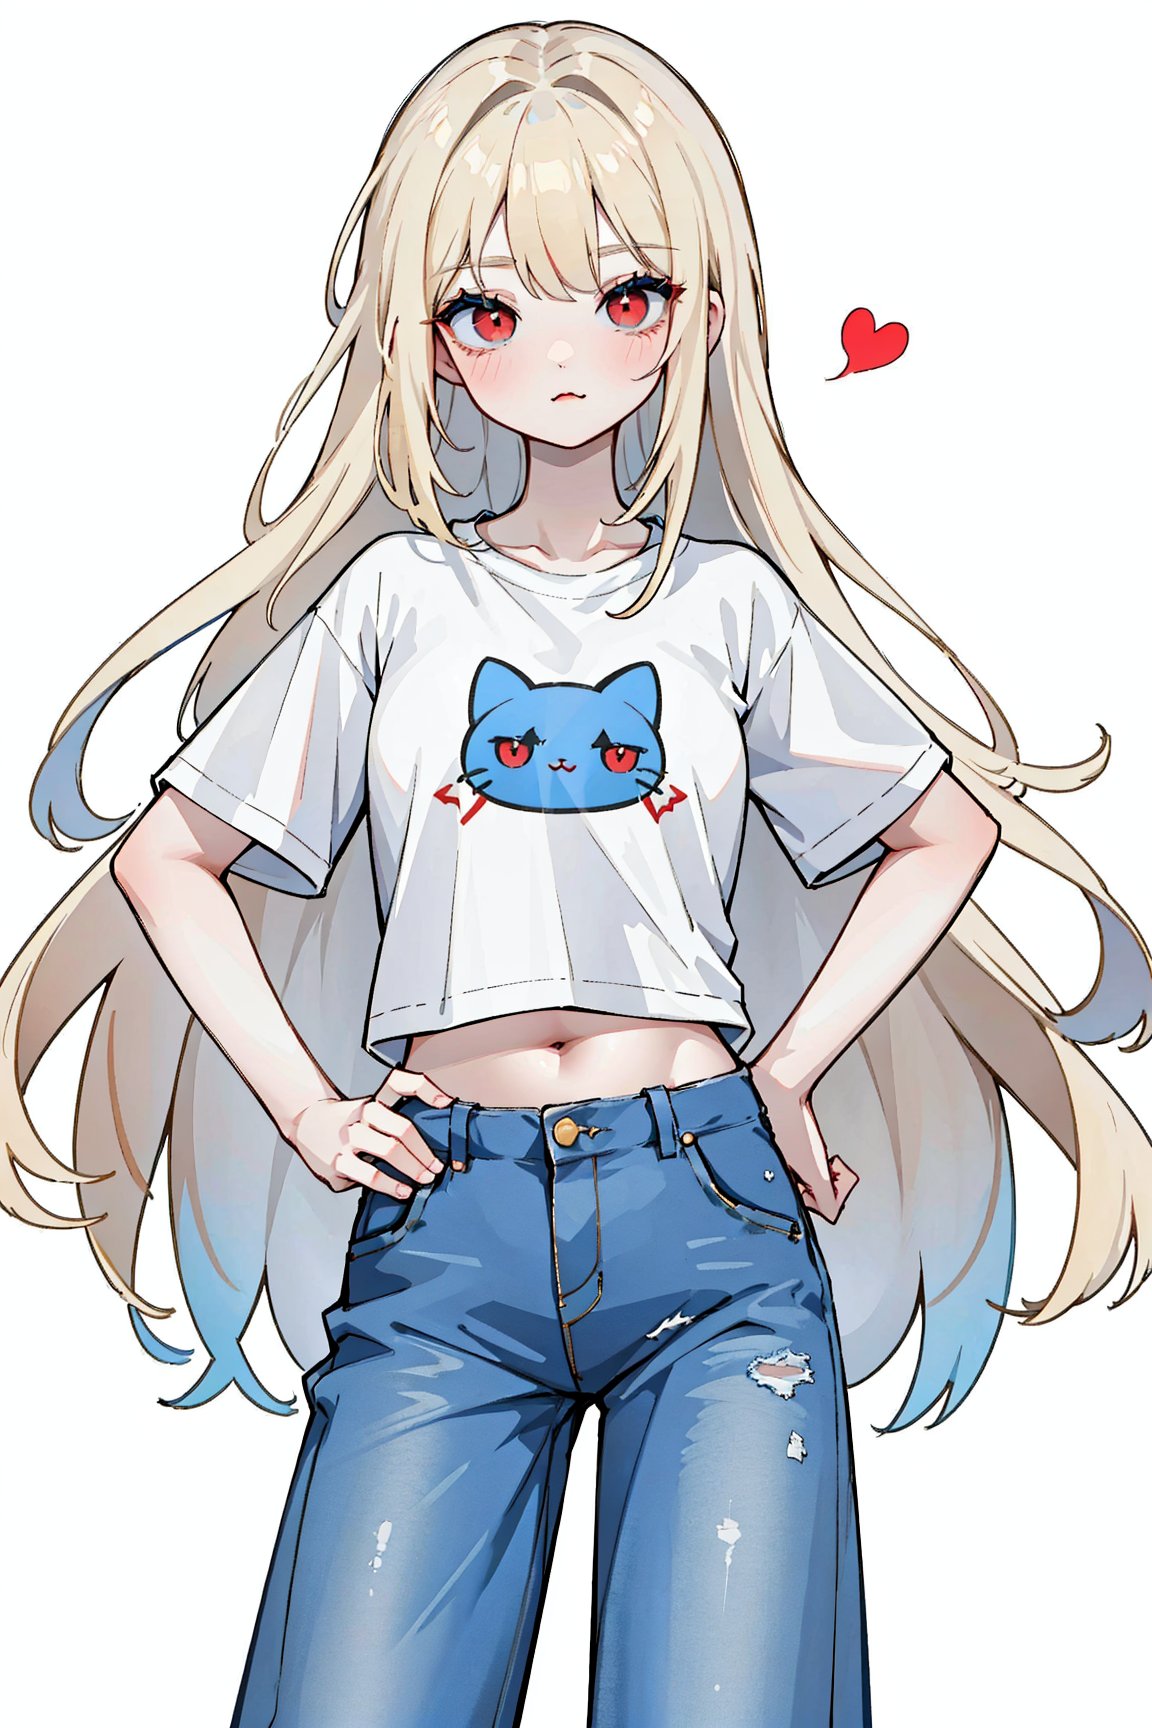 (masterpiece, best quality, highres:1.3), ultra resolution image, (solo), (1girl), formad hair:1.4, forehead, long hair syle, tomboy, blonde hair, red eye, simple --niji, kpop girl, :3:1.3, (simple white t shirts), (blue jeans), navel, large hips, mature girl, kawai pose, victory, :3:1.2, face close to viewer, fall in love to viewer, dynamic angle:1.4, pixel_art,